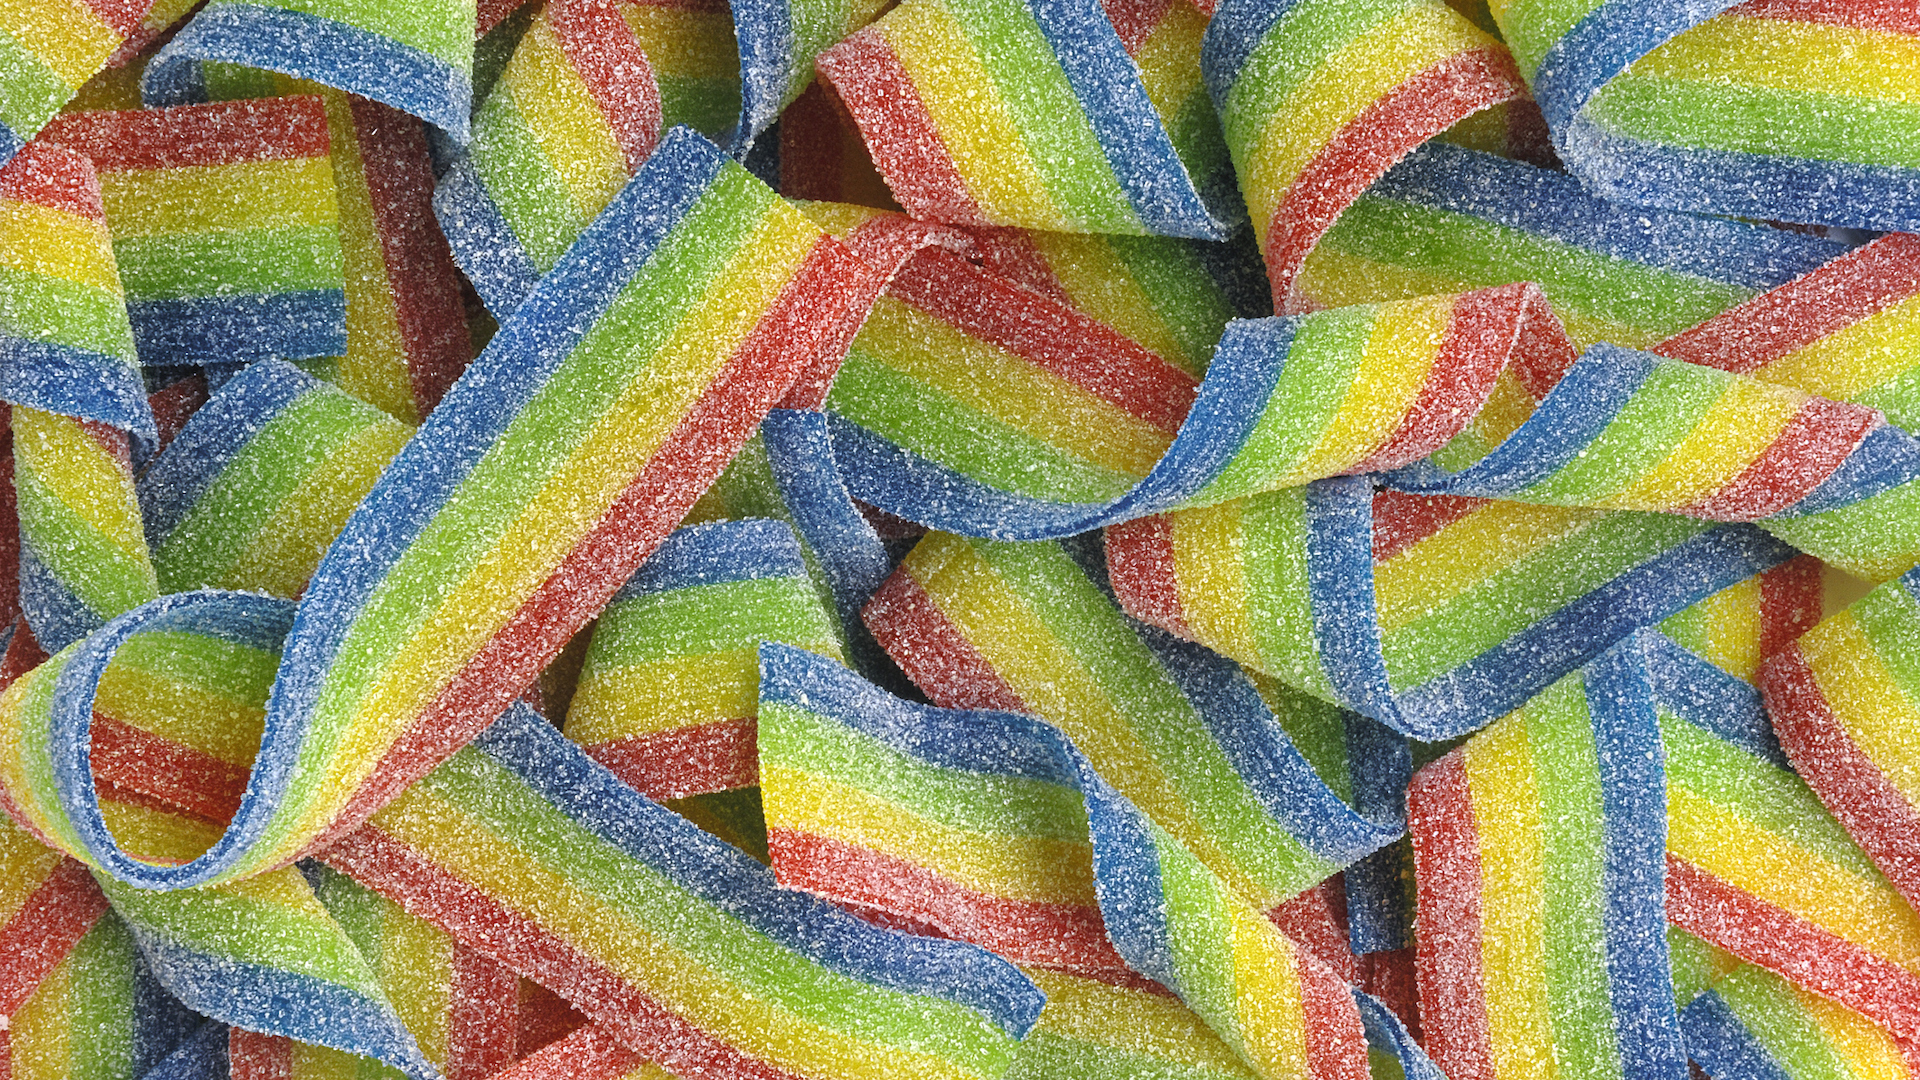 Ribbons of sour sweets